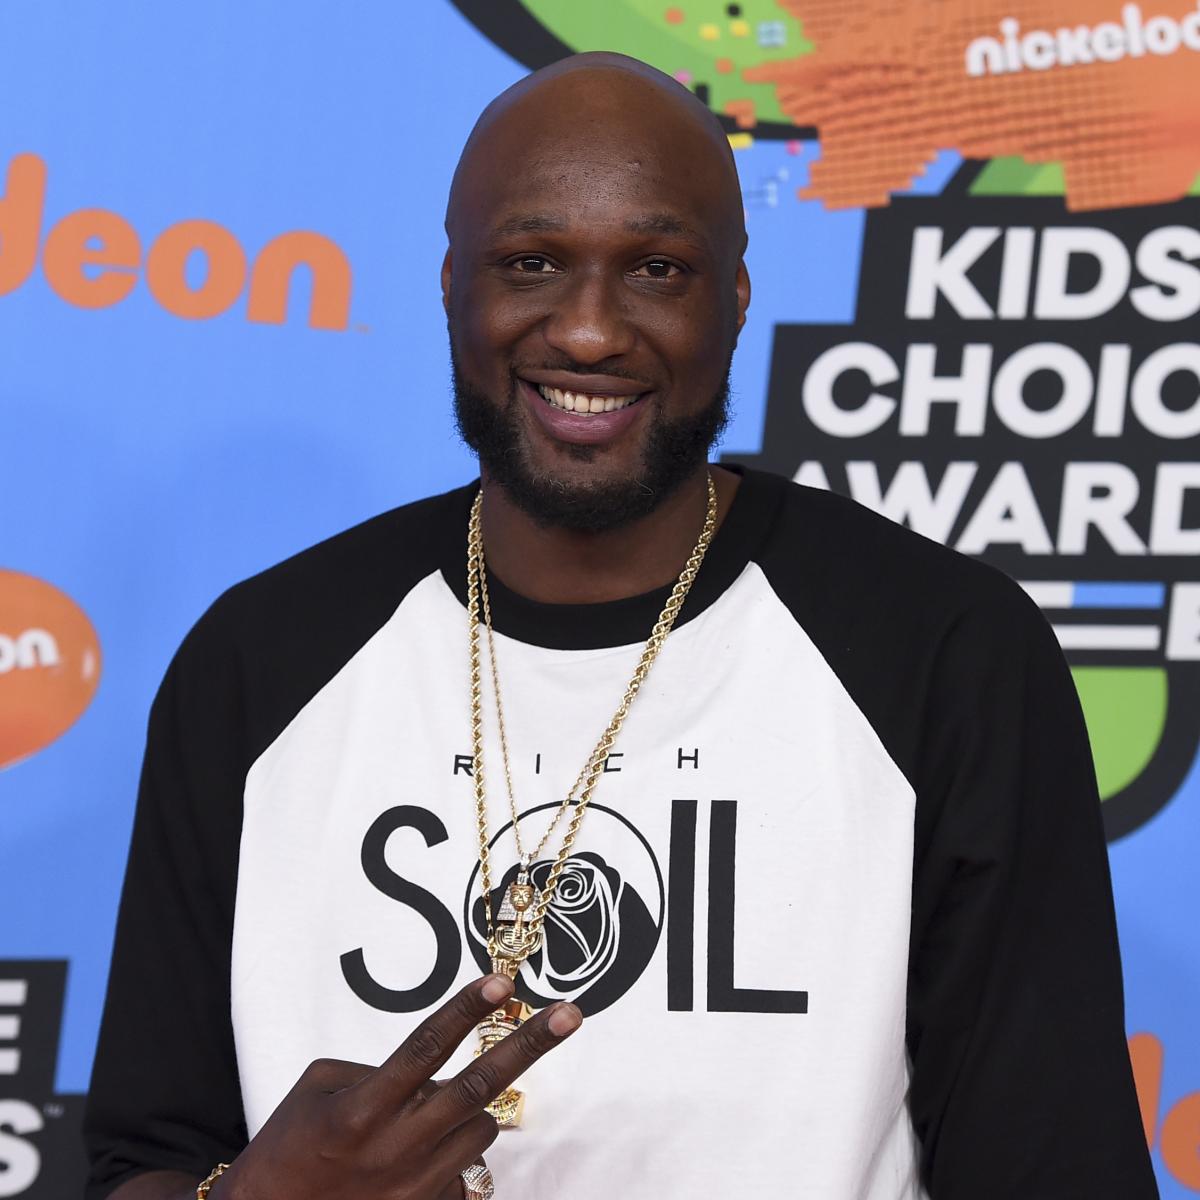 Ex-NBA Enormous title Lamar Odom to Fight Aaron Carter in Charity Boxing Match on June 12